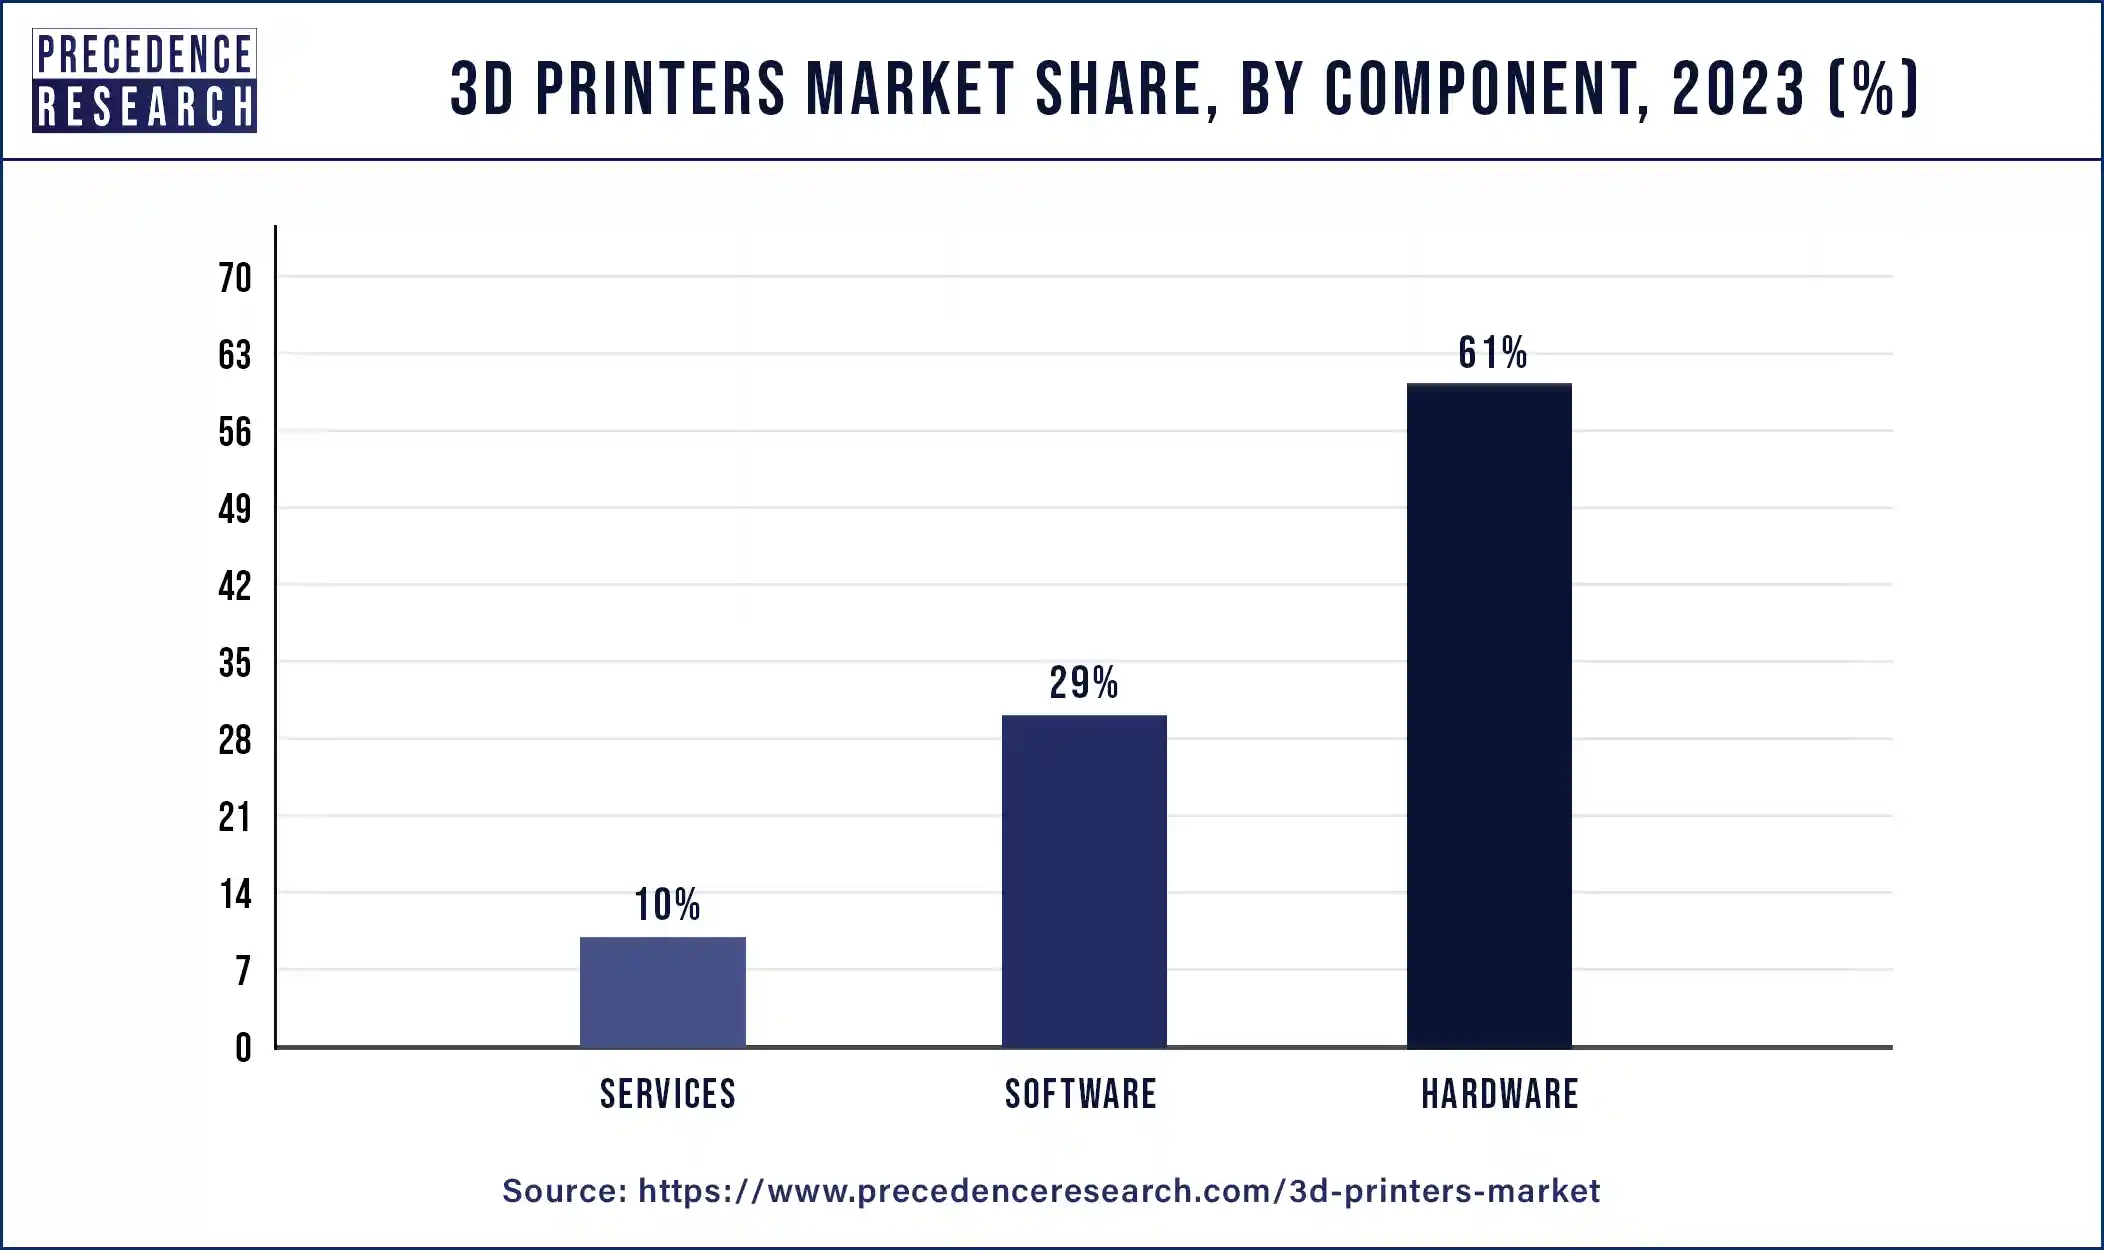 3D Printers MarketShare, By Component, 2023 (%)